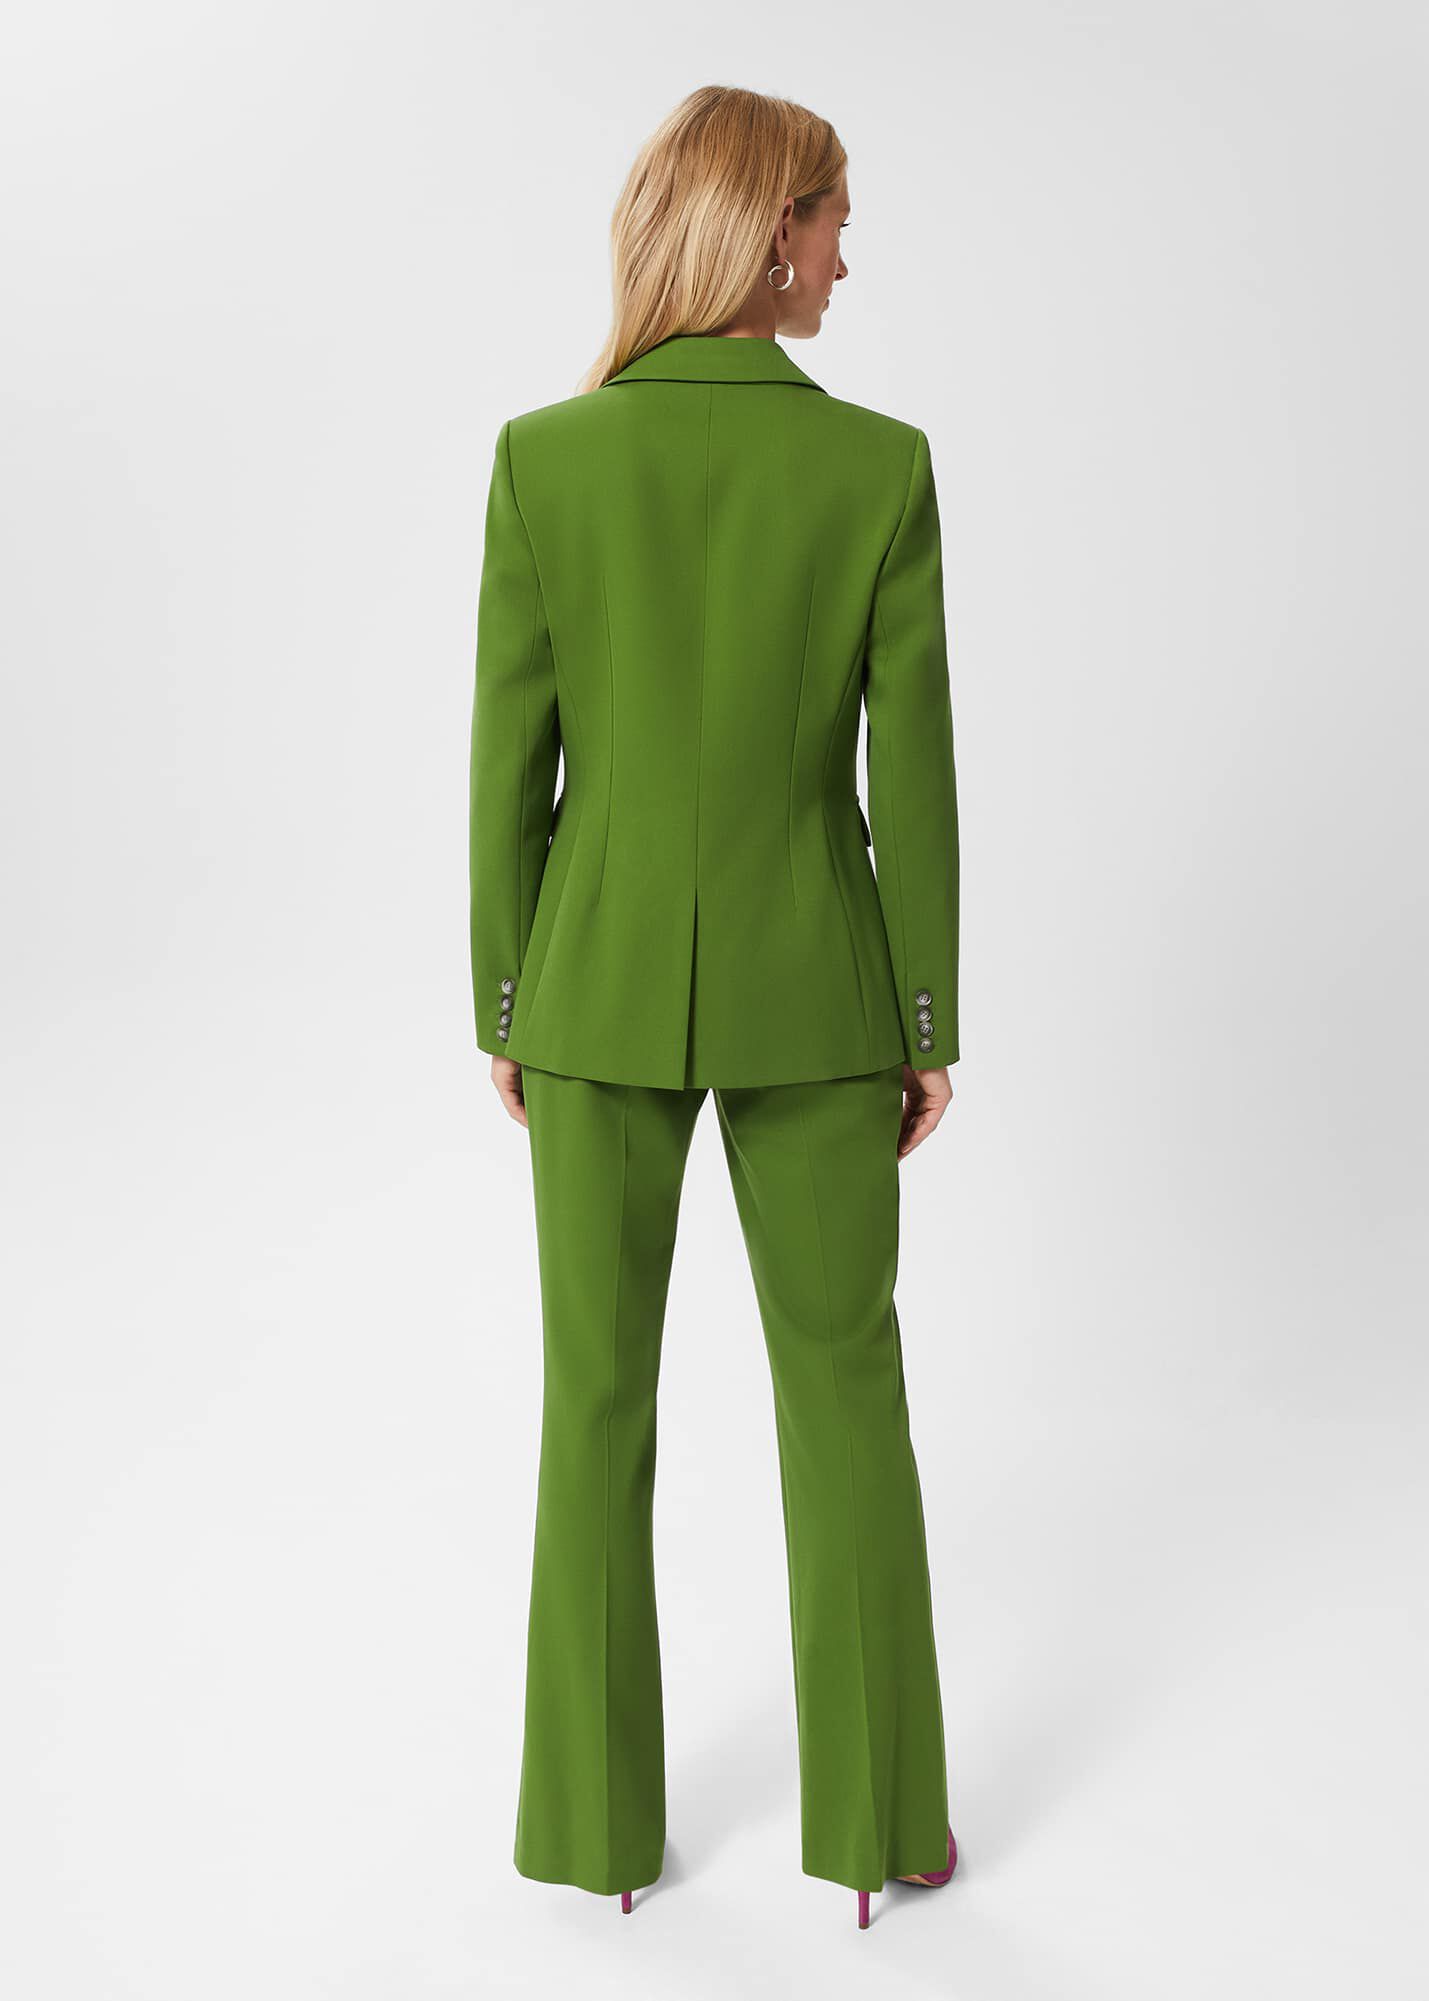 Women's Workwear Suits | Womens Suits for Work | Next UK